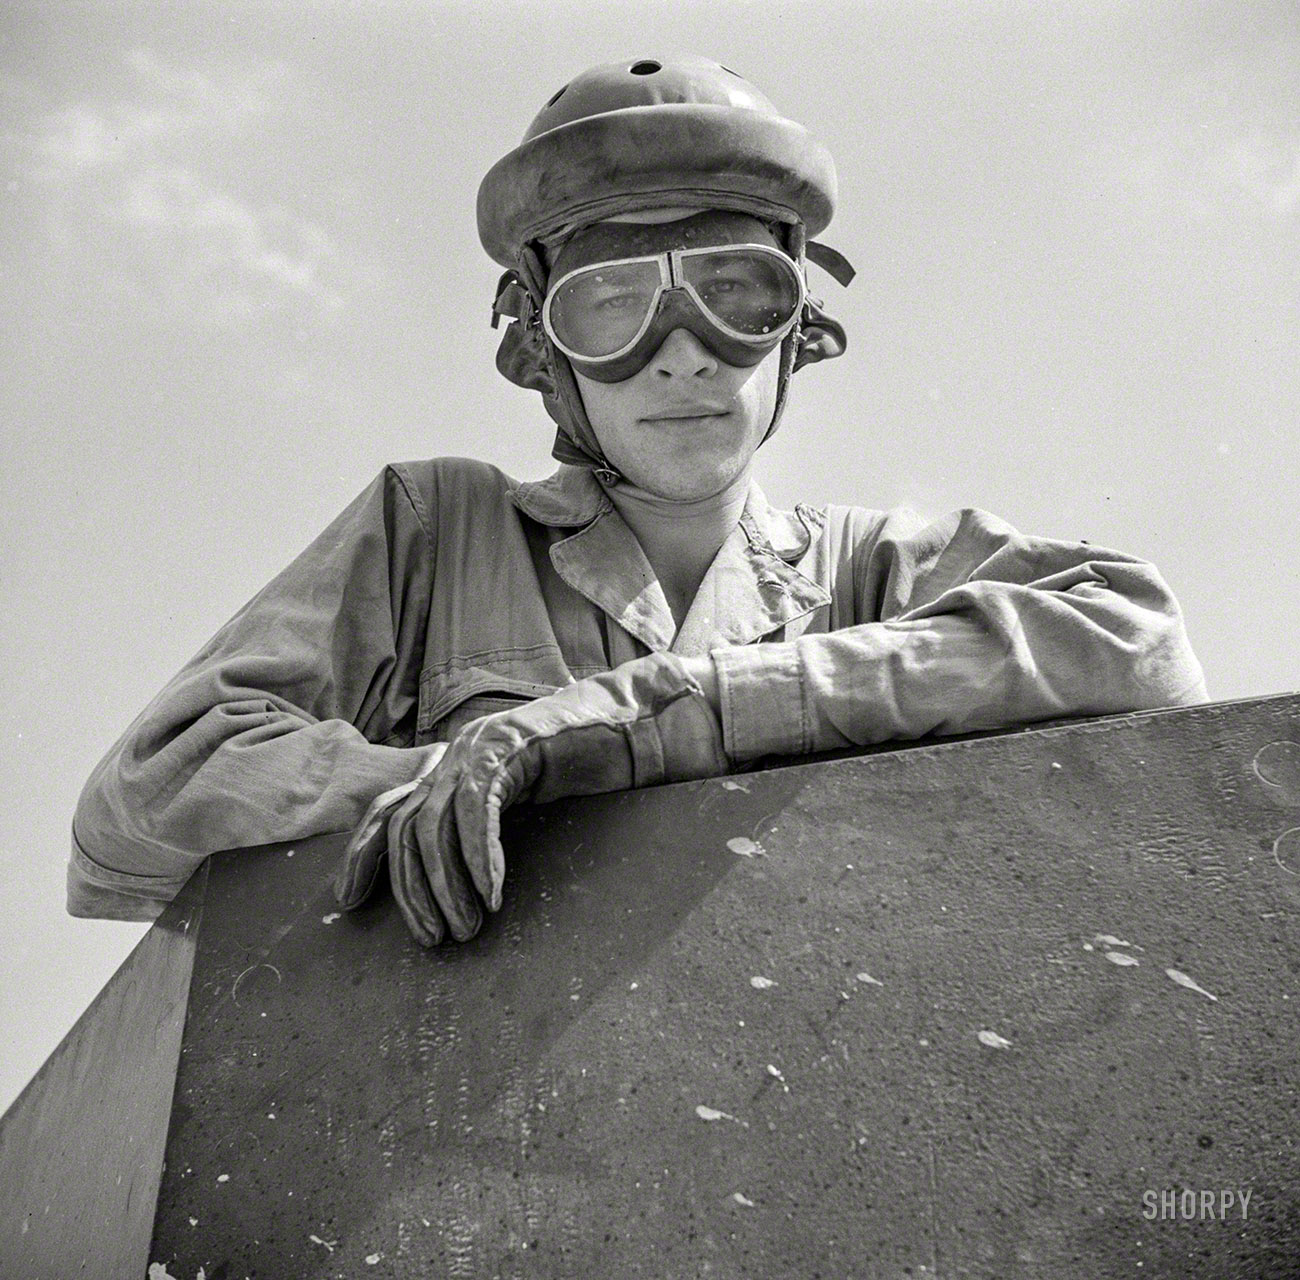 August 1941. "Tank driver. Fort Belvoir, Virginia." Medium format negative by John Collier. Office of War Information photo collection. View full size.